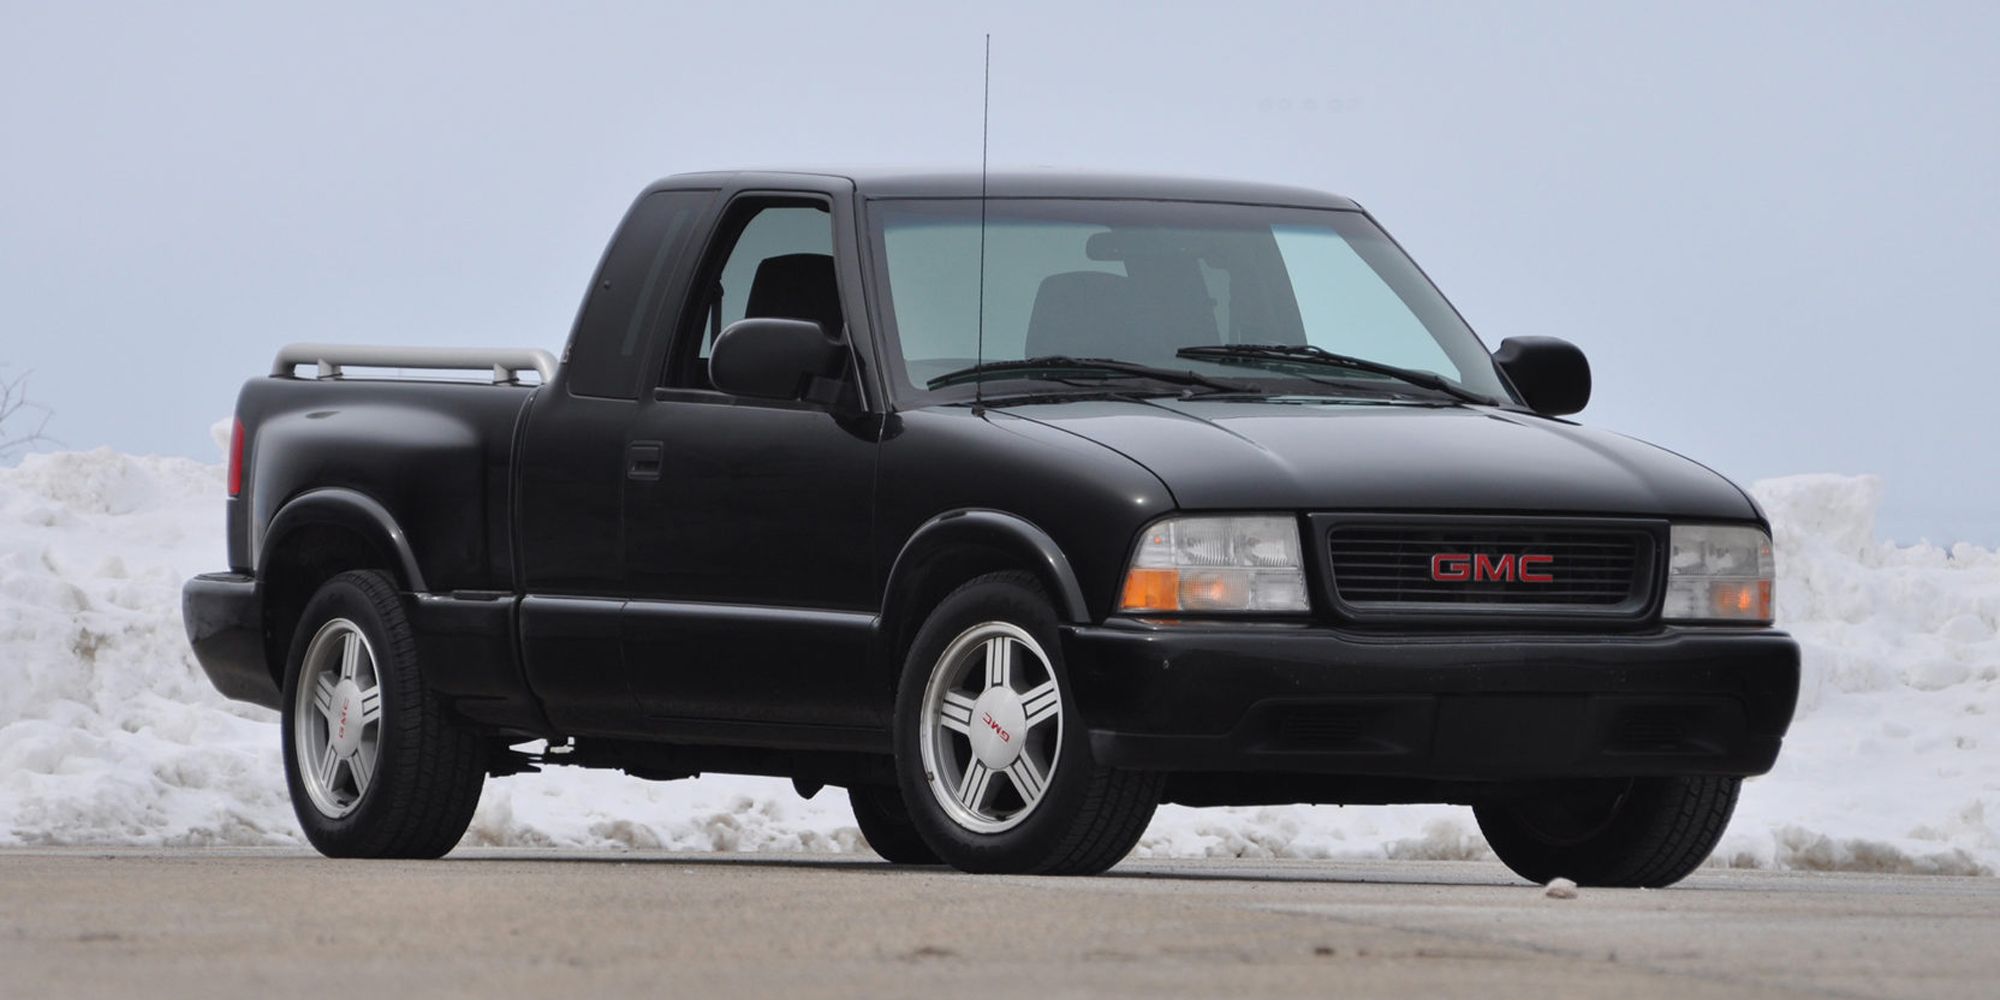 The front of the S-10 based GMC Sonoma